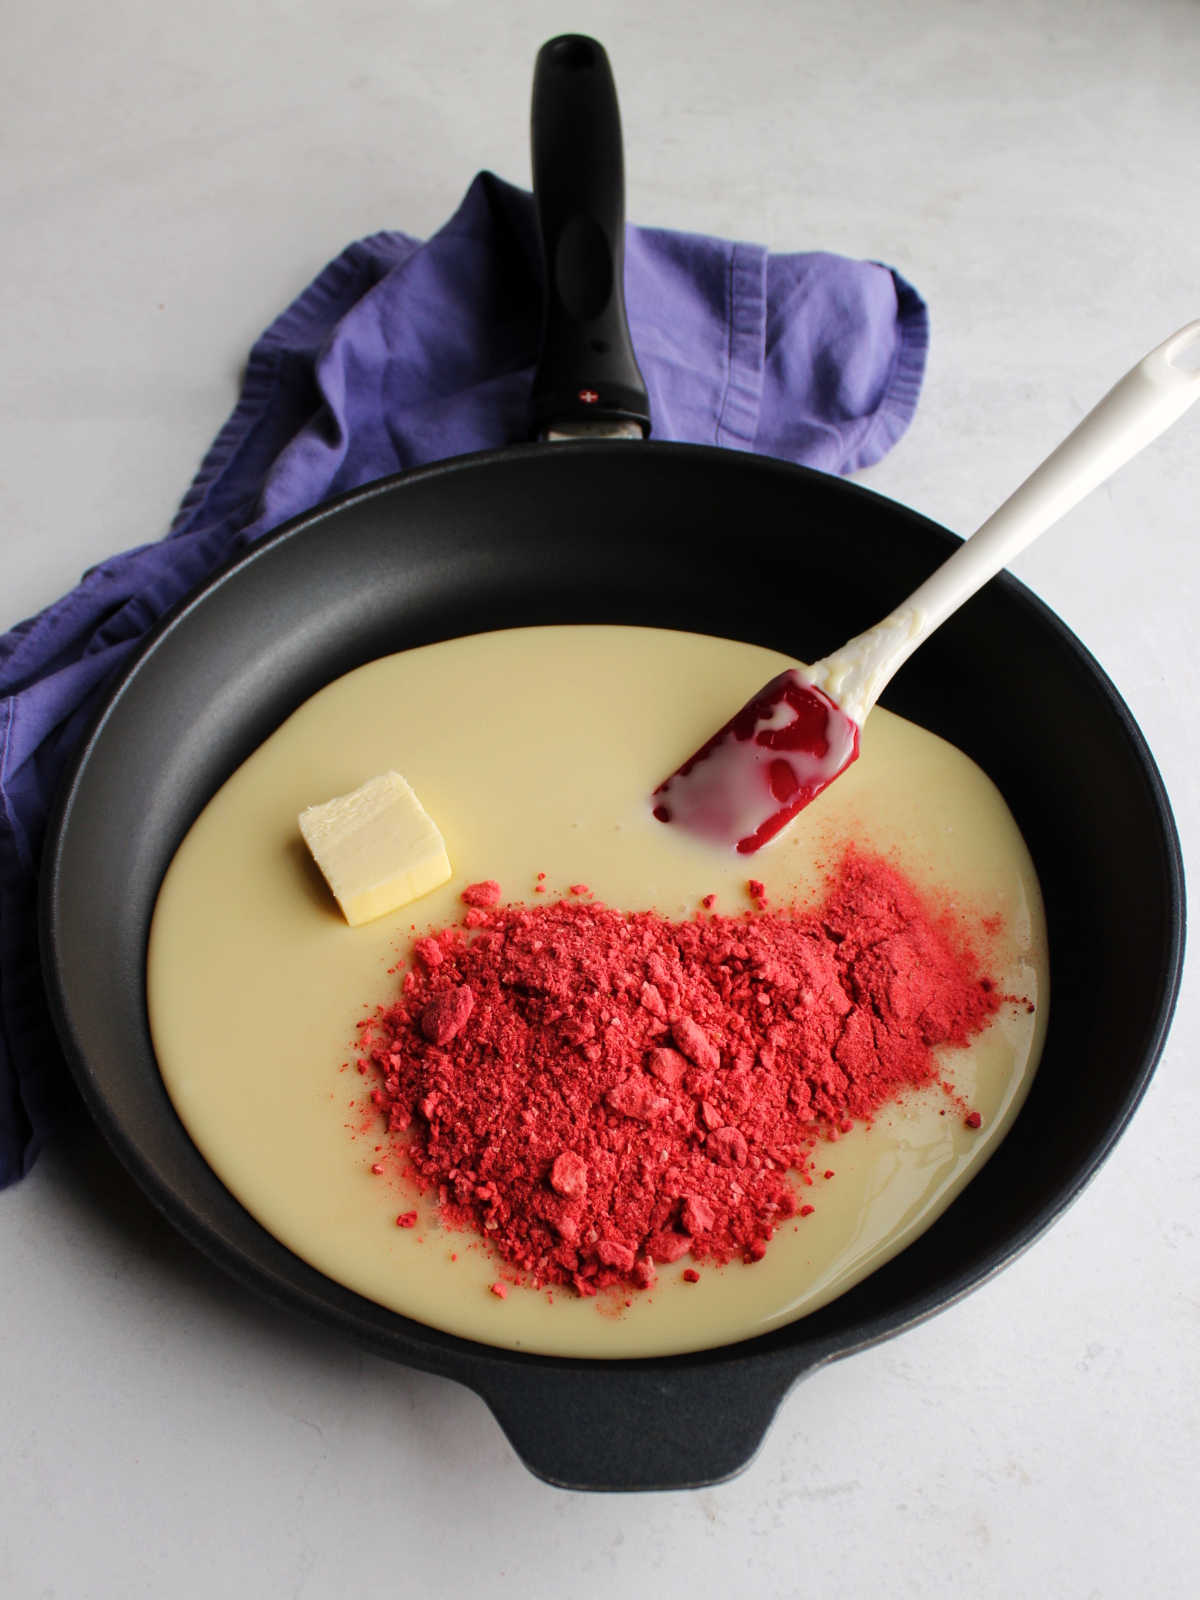 Skillet with condensed milk, butter and crushed freeze-dried strawberries inside ready to cook.